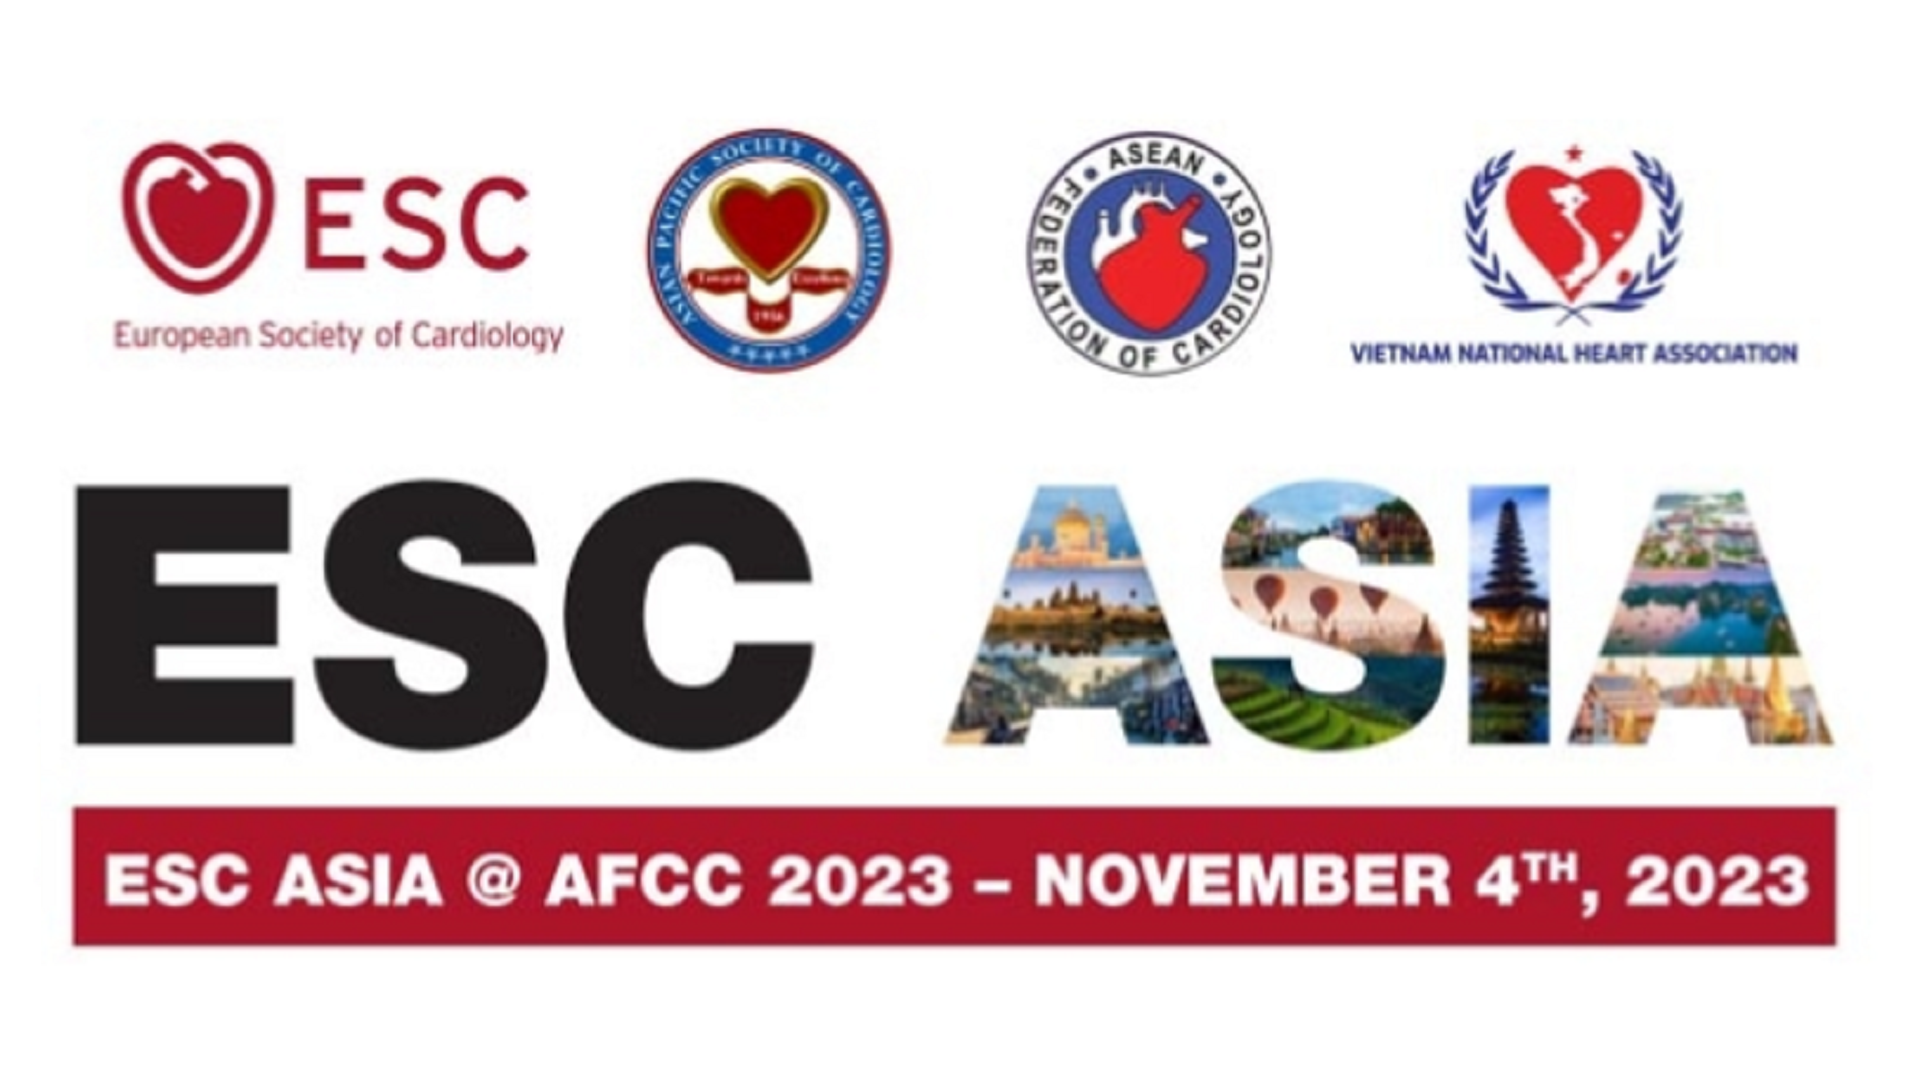 ESC Asia with AFC: Time to solve the issue of poor blood pressure control: simply follow the guidelines